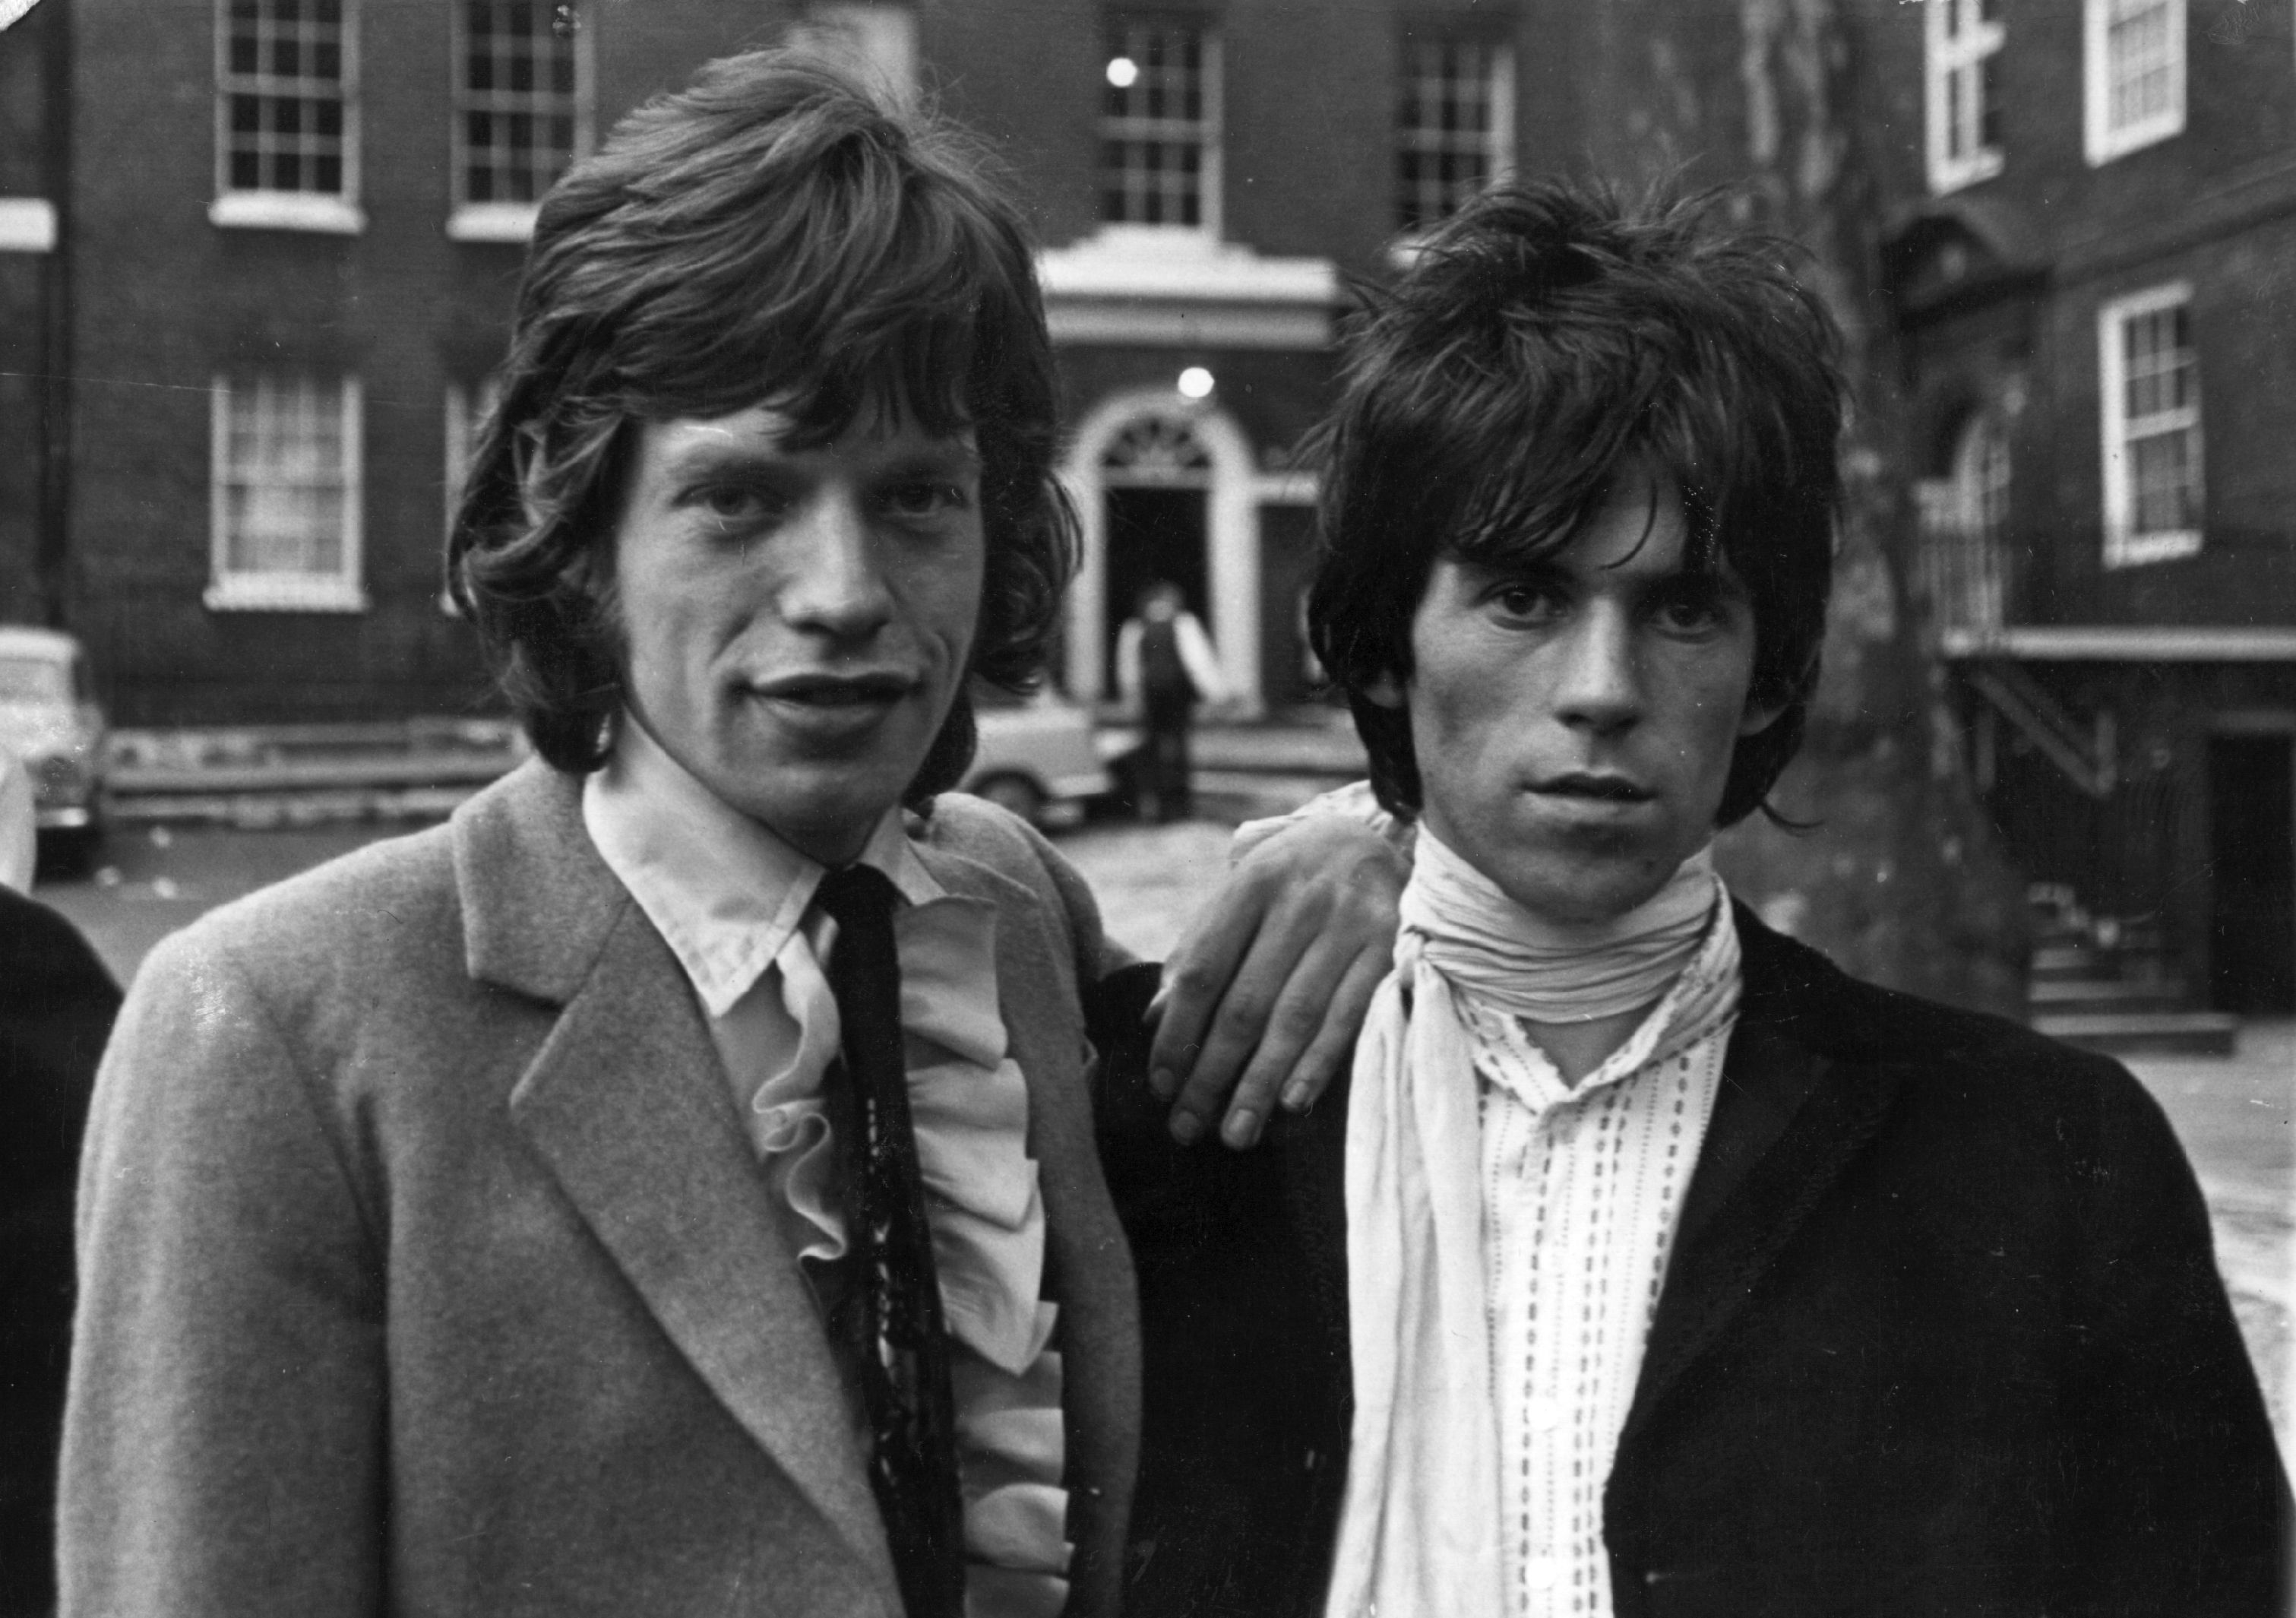 Keith Richards and Mick Jagger wearing suit jackets